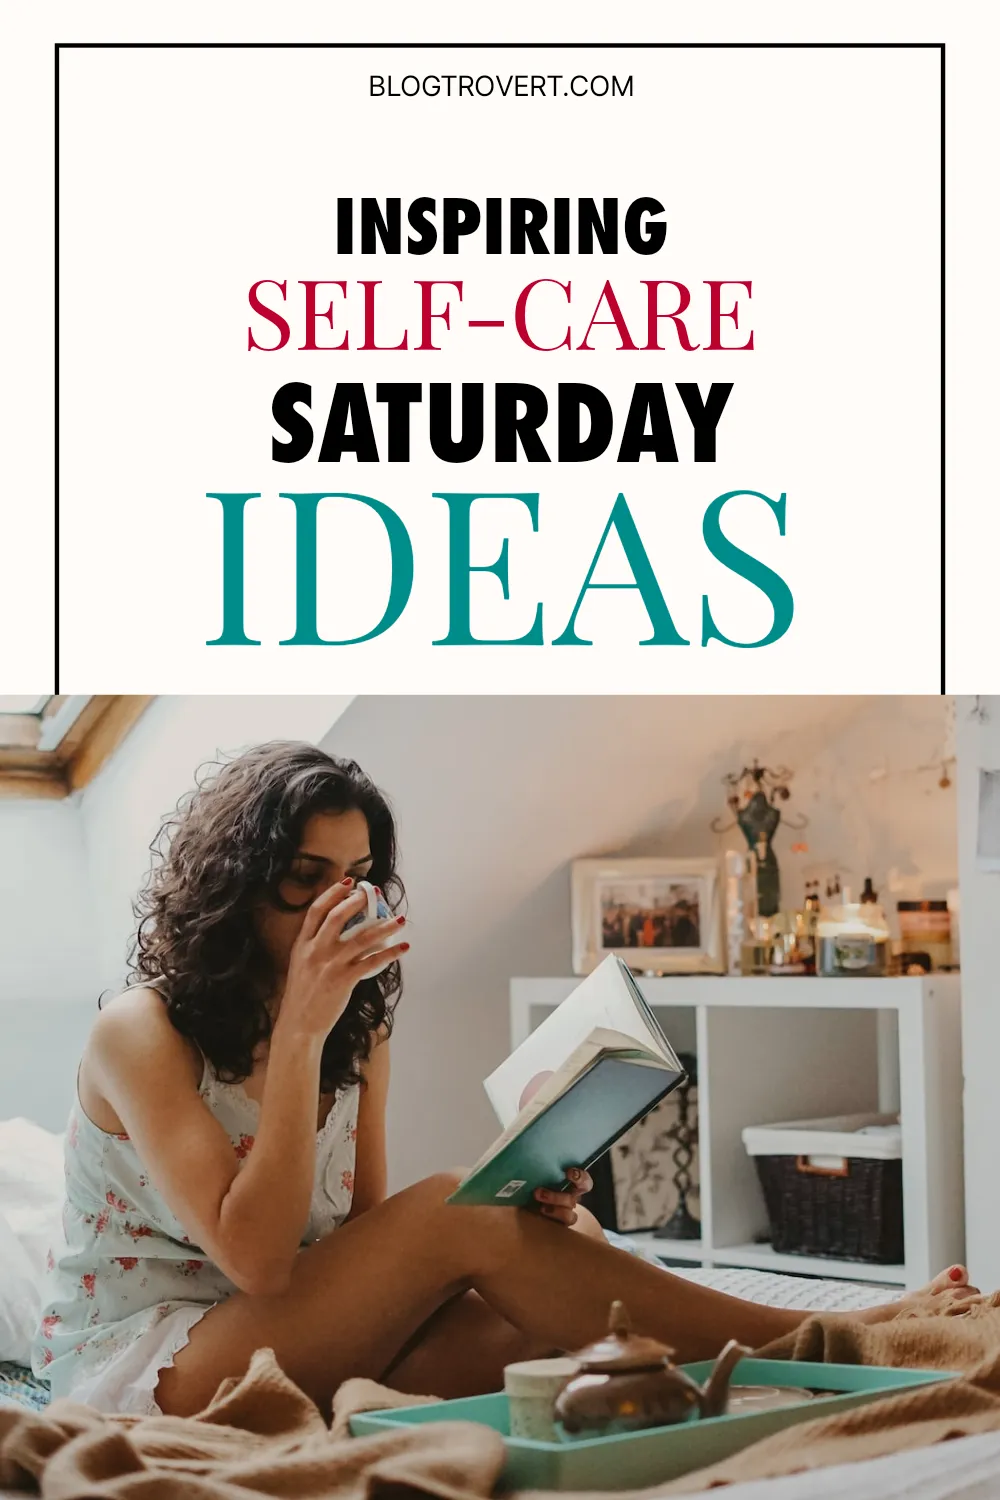 50+ amazing self-care Saturday ideas to try this weekend 1